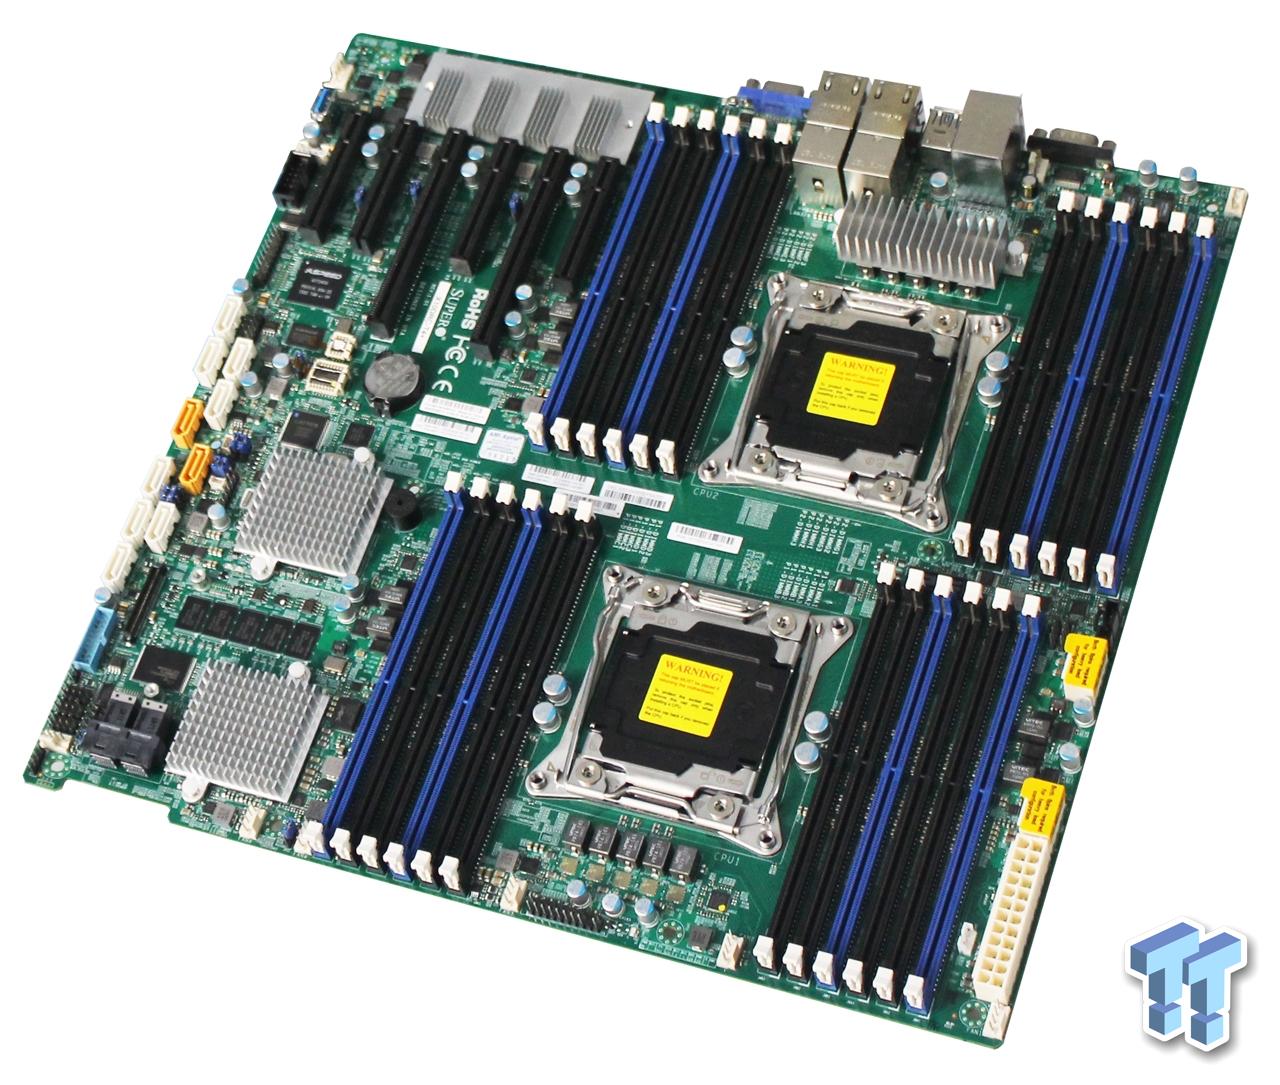 Supermicro X10DRC-T4+ (Intel C612) Server Motherboard Review